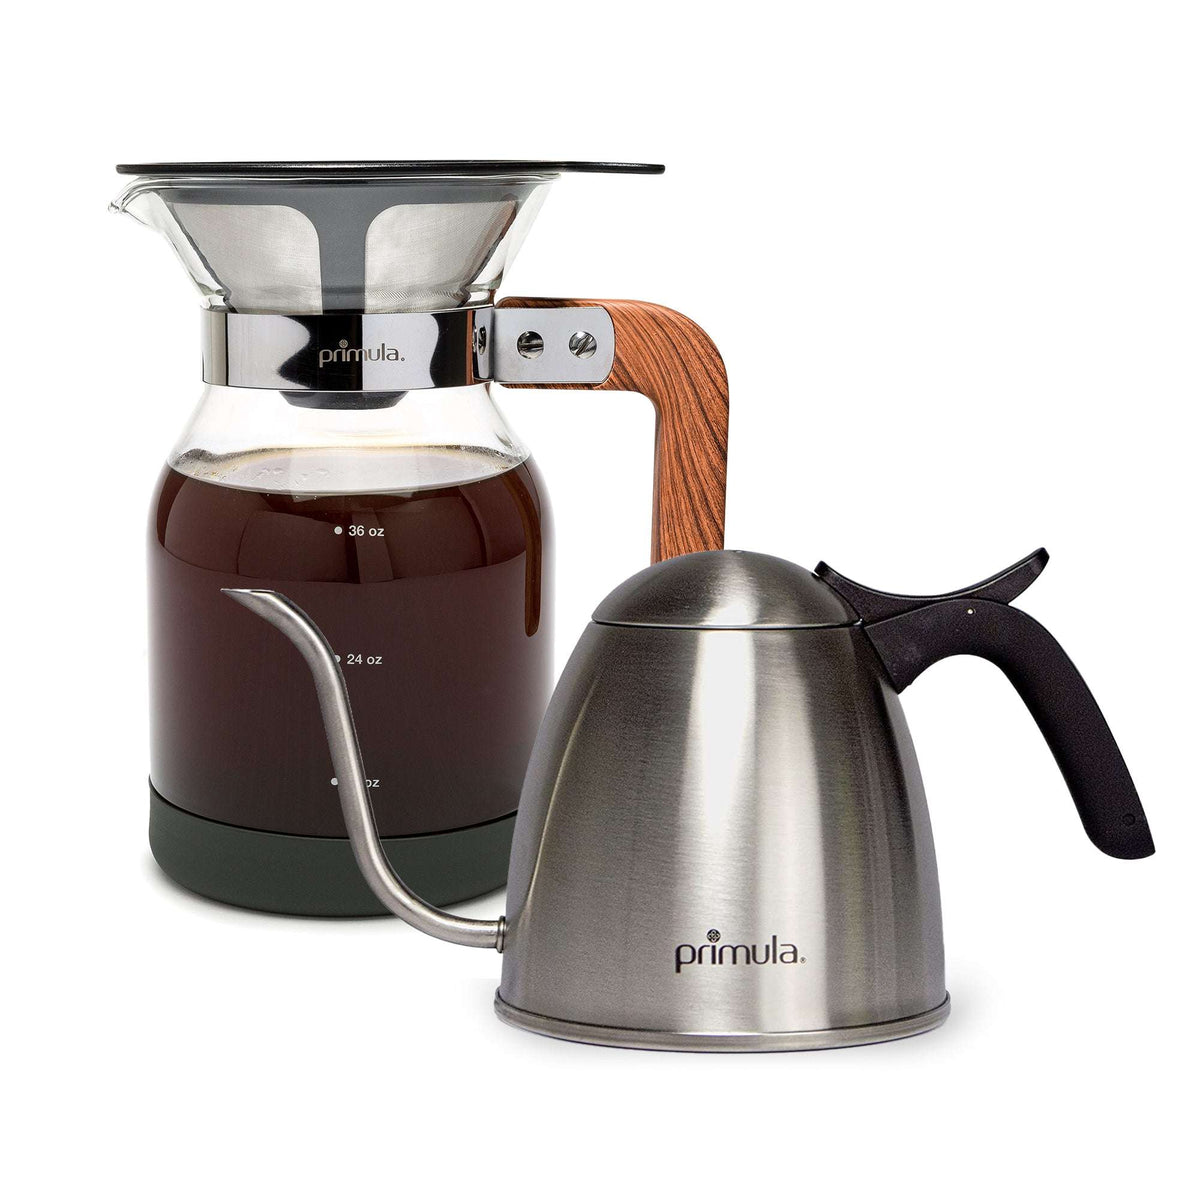 Primula Pour-Over Coffee Maker - Silver, 1 ct - Harris Teeter